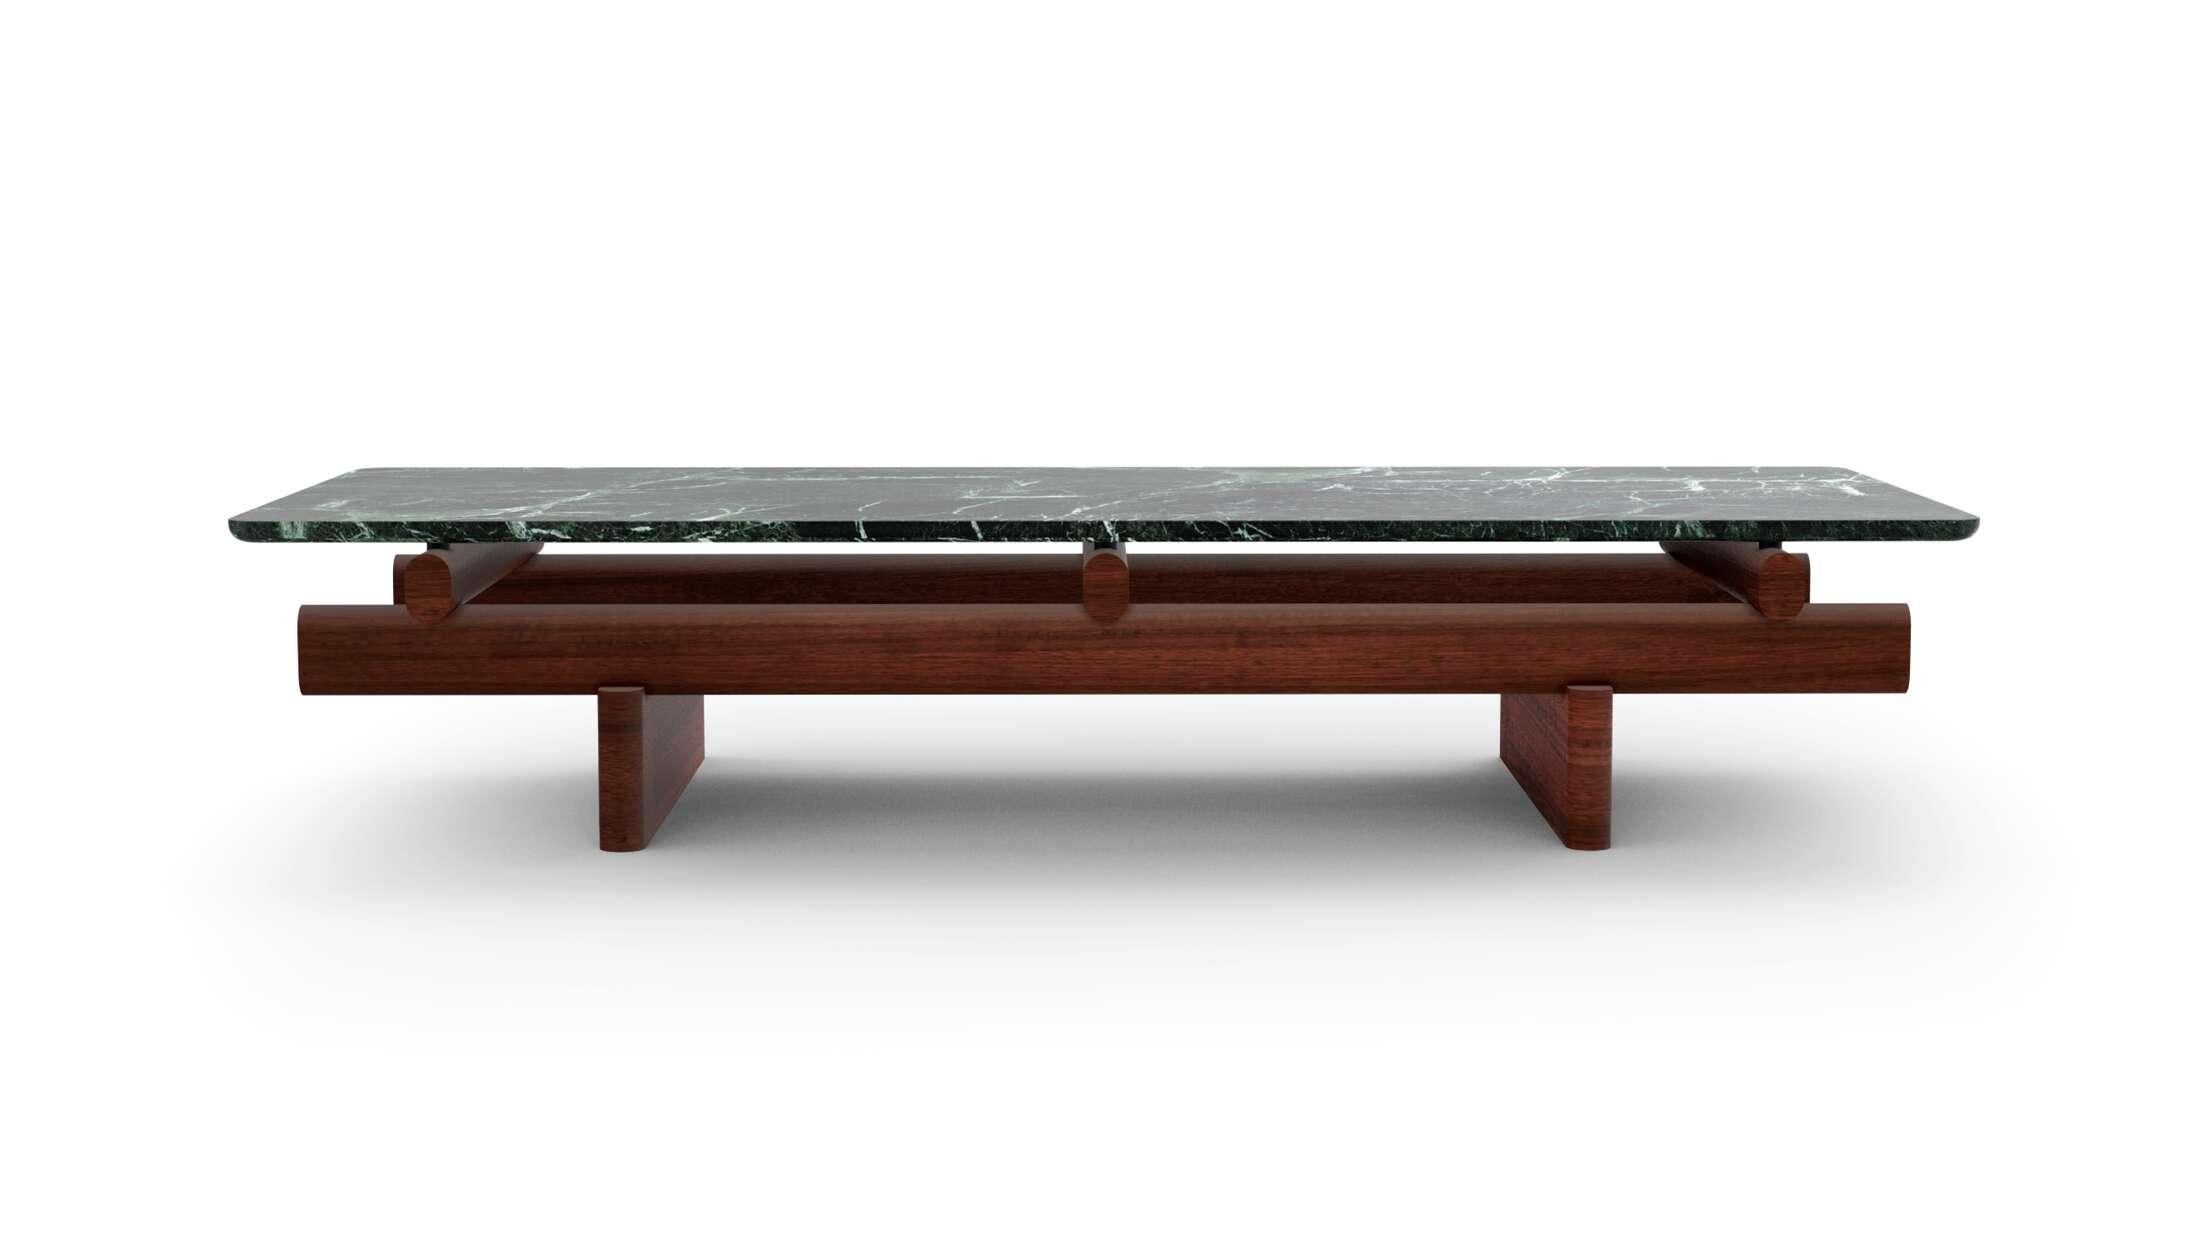 Sengu Coffee Table designed by Patricia Urquiola.
Manufactured by Cassina (Italy).

AN ASIAN INVITATION
Asian-inspired, this design coffee table by Patricia Urquiola is a domestic architecture enhanced by the layering of different materials.

The